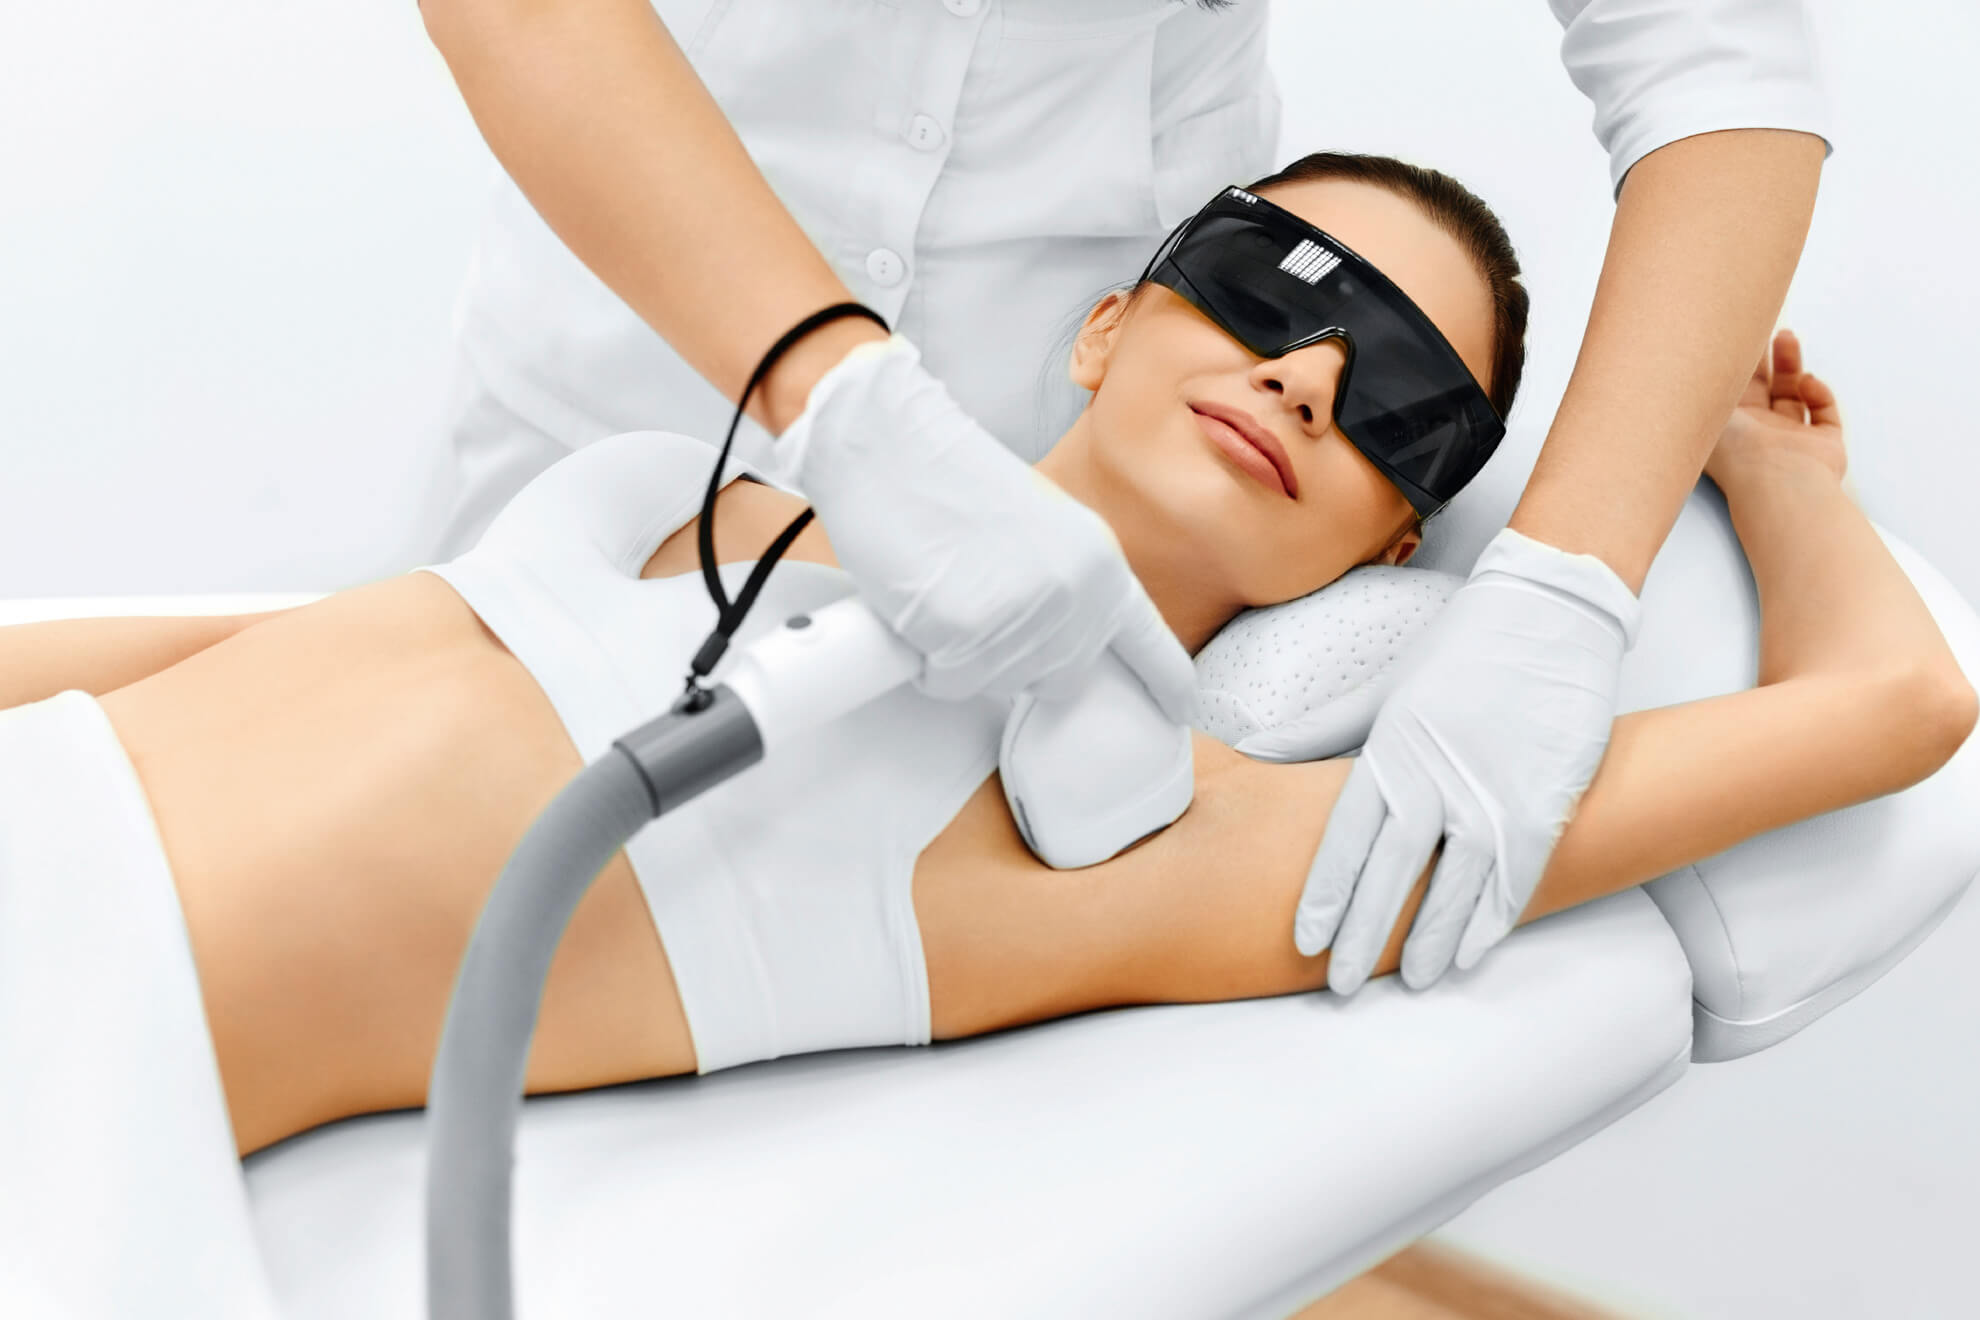 Does Laser Hair Removal Hurt More Than Waxing